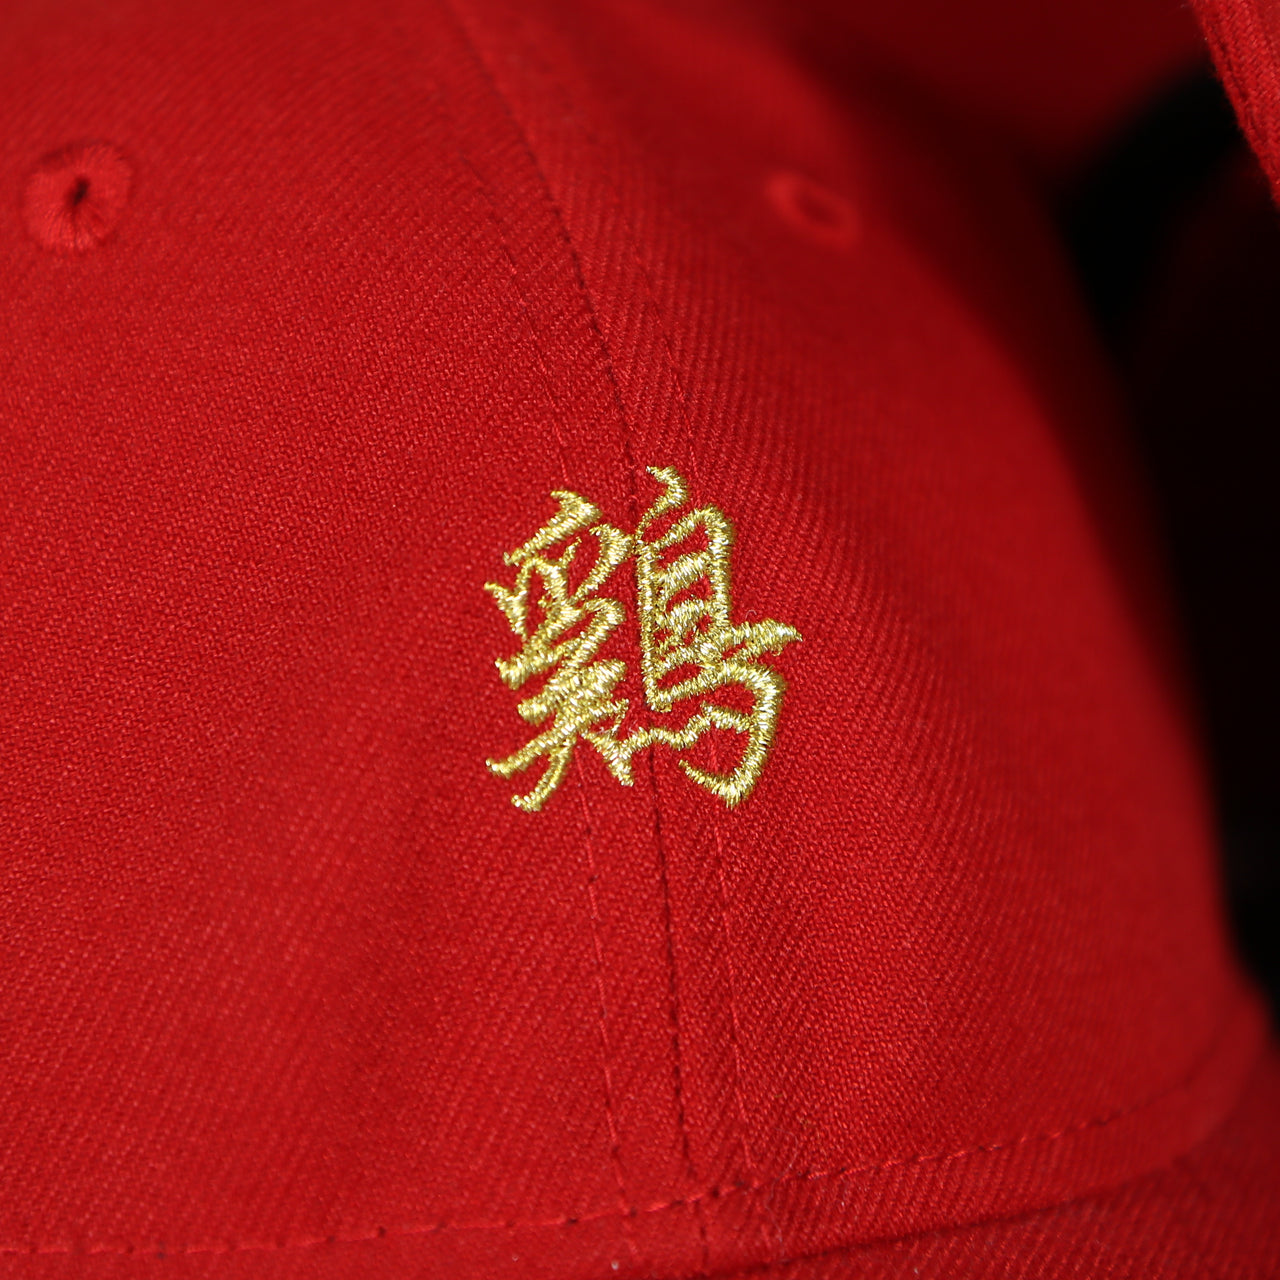 chinese zodiac logo on theYear Of The Rooster 2017 Chinese Zodiac Dad Hat | Red Baseball Hat